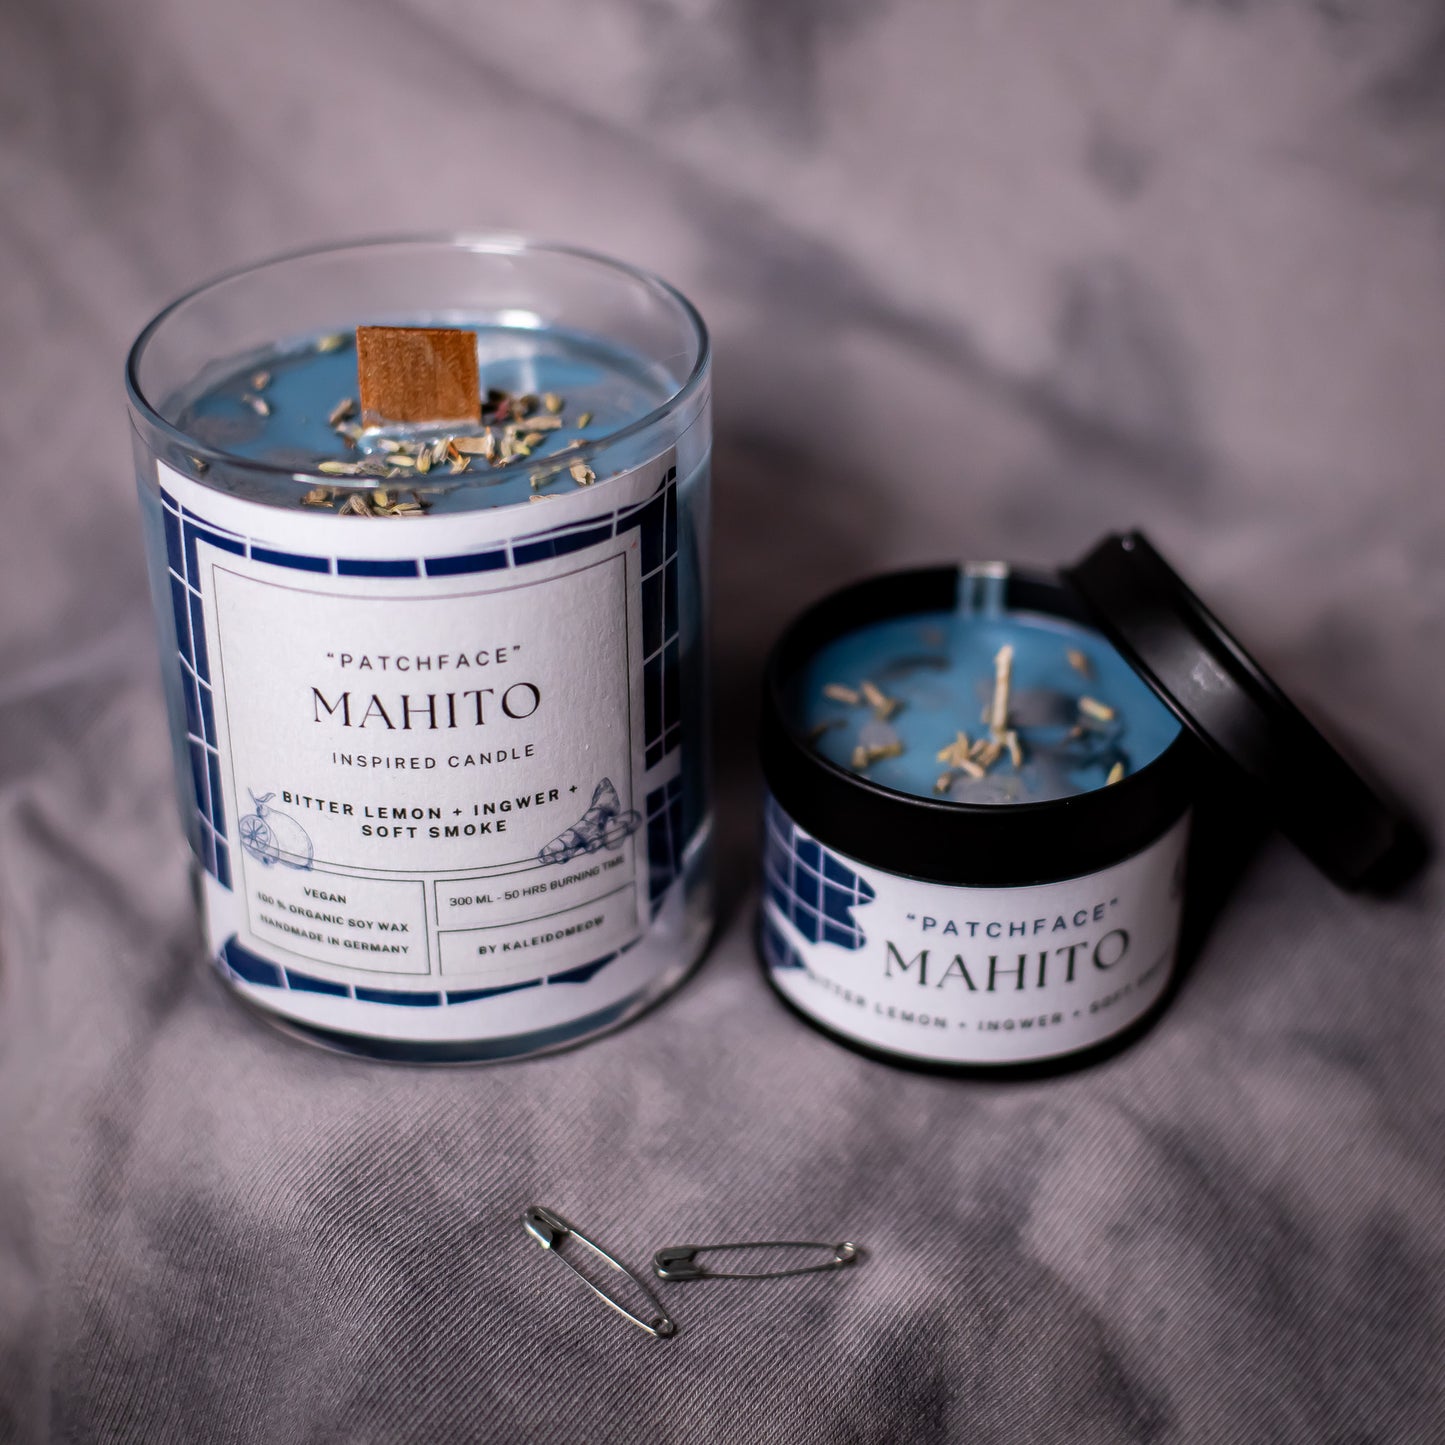 MAHITO inspired candle - 'Patchface' Jujutsu kaisen inspired soy Candle 300 ML